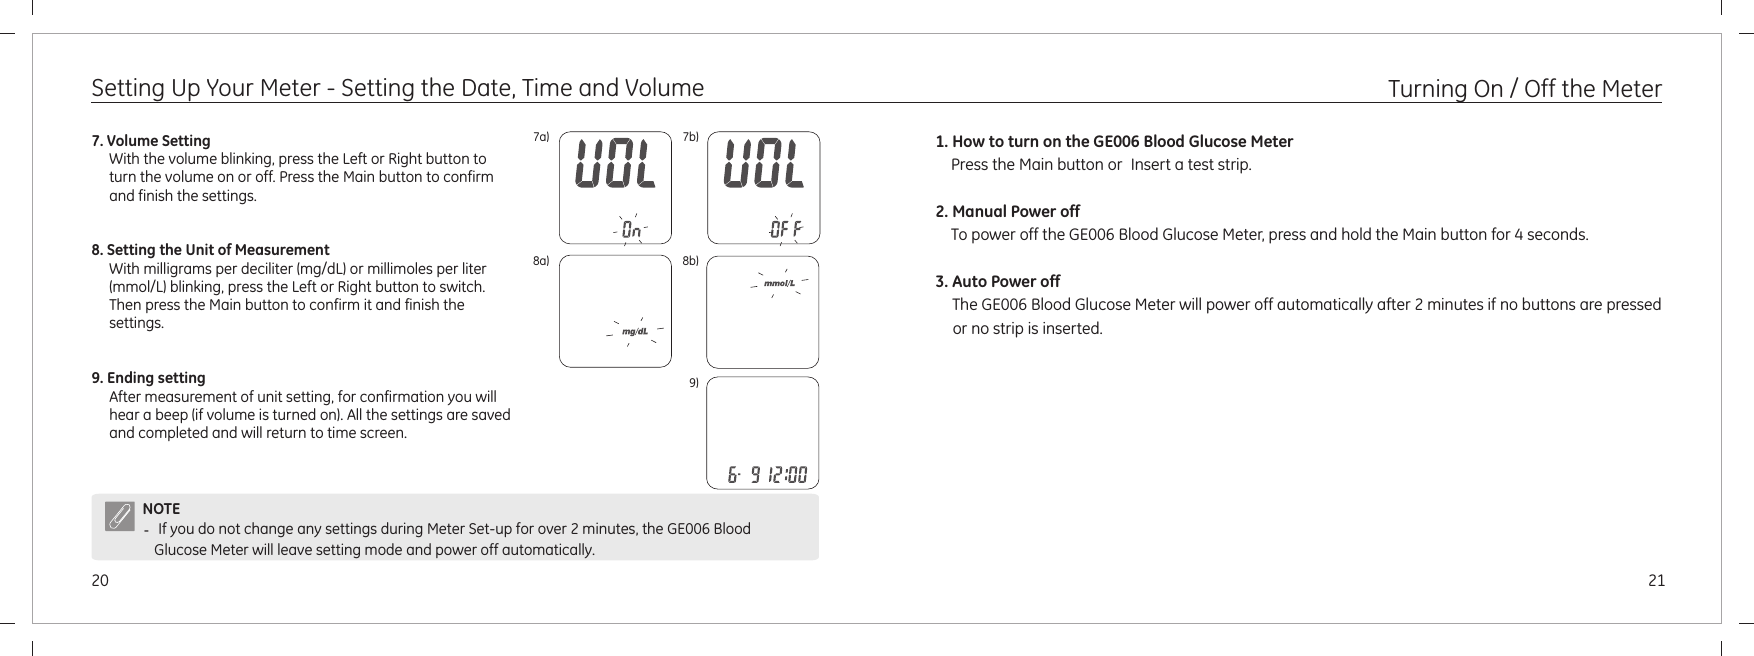 21207a) 7b)NOTE- If you do not change any settings during Meter Set-up for over 2 minutes, the GE006 Blood Glucose Meter will leave setting mode and power off automatically.7. Volume SettingWith the volume blinking, press the Left or Right button to turn the volume on or off. Press the Main button to confirm and finish the settings.8. Setting the Unit of MeasurementWith milligrams per deciliter (mg/dL) or millimoles per liter (mmol/L) blinking, press the Left or Right button to switch. Then press the Main button to confirm it and finish the settings.9. Ending settingAfter measurement of unit setting, for confirmation you will hear a beep (if volume is turned on). All the settings are saved and completed and will return to time screen. Setting Up Your Meter - Setting the Date, Time and Volume1. How to turn on the GE006 Blood Glucose Meter    Press the Main button or Insert a test strip.2. Manual Power off     To power off the GE006 Blood Glucose Meter, press and hold the Main button for 4 seconds.3. Auto Power off  The GE006 Blood Glucose Meter will power off automatically after 2 minutes if no buttons are pressed or no strip is inserted.Turning On / Off the Meter8a) 8b)9)